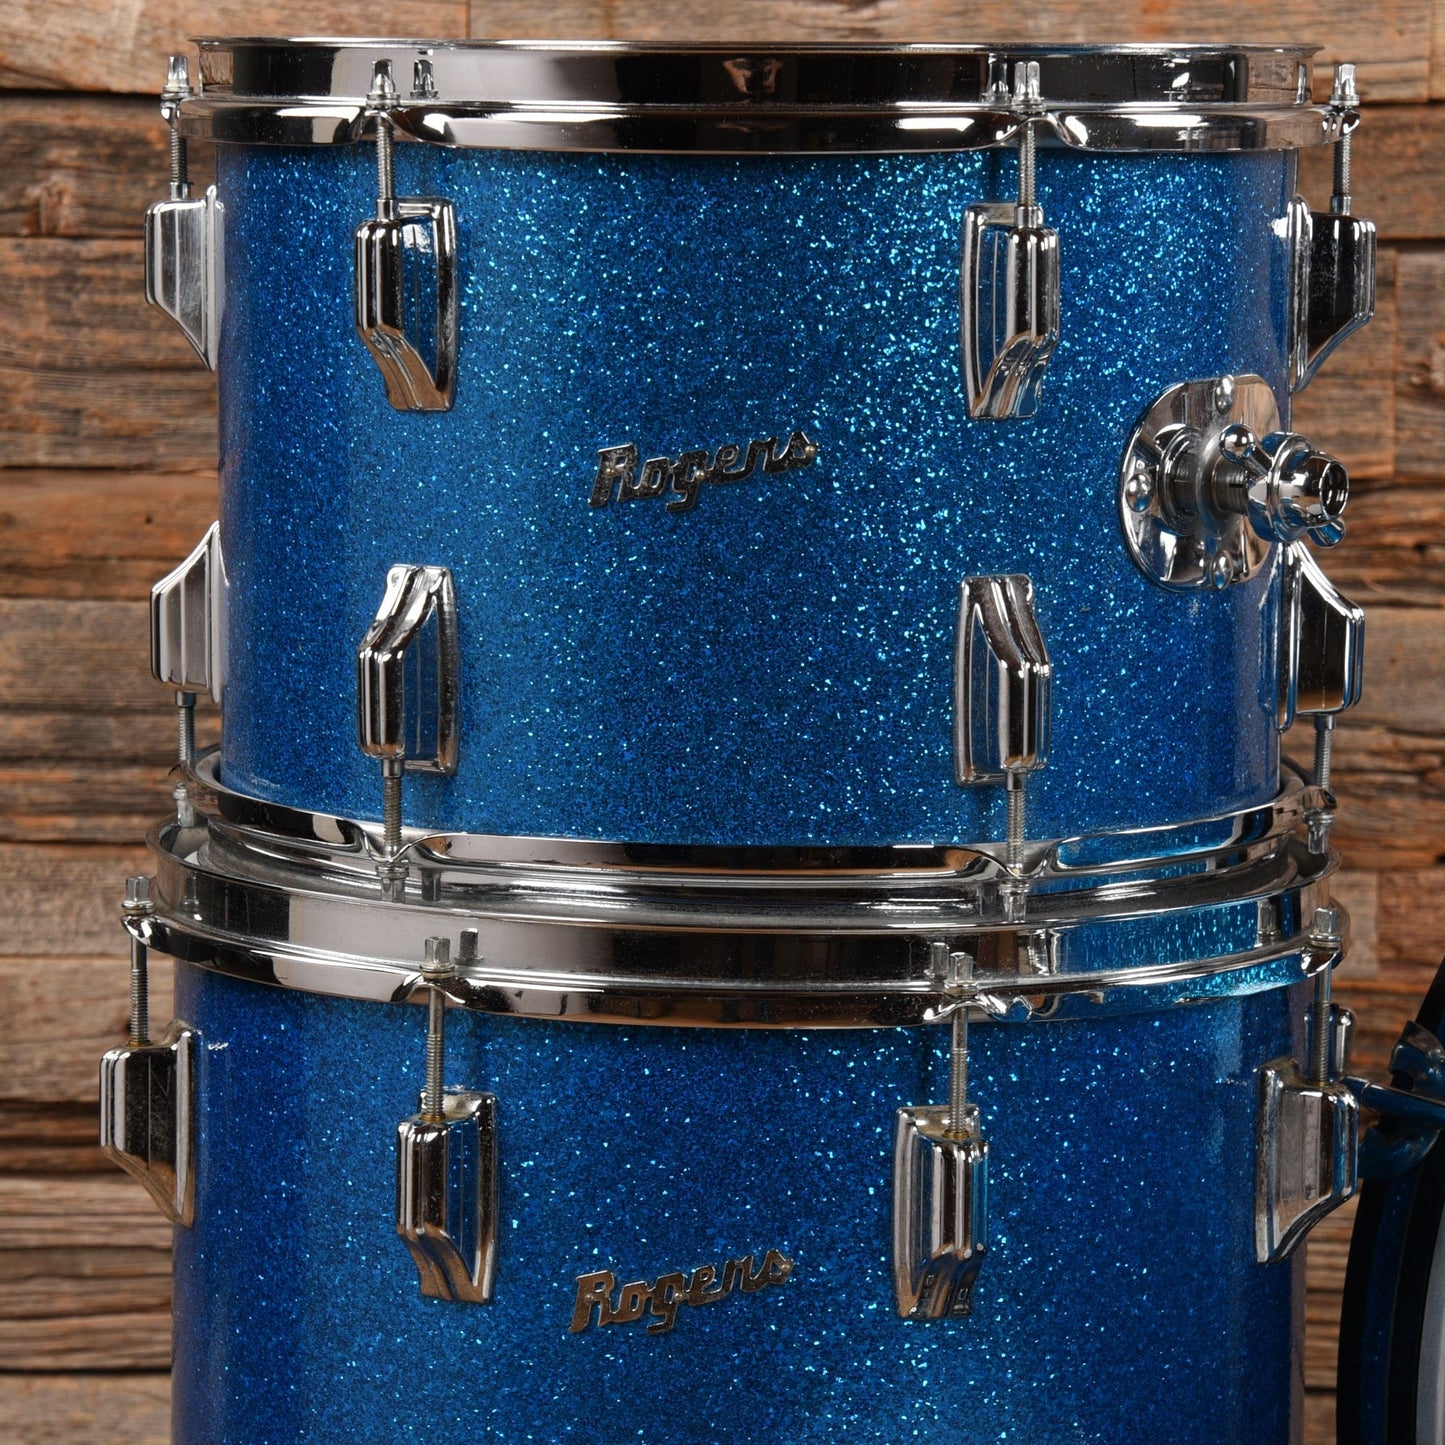 Rogers 1960's Fusion Outfit 14/13/12/20 4 pc. Drum Kit Blue Sparkle Drums and Percussion / Acoustic Drums / Full Acoustic Kits